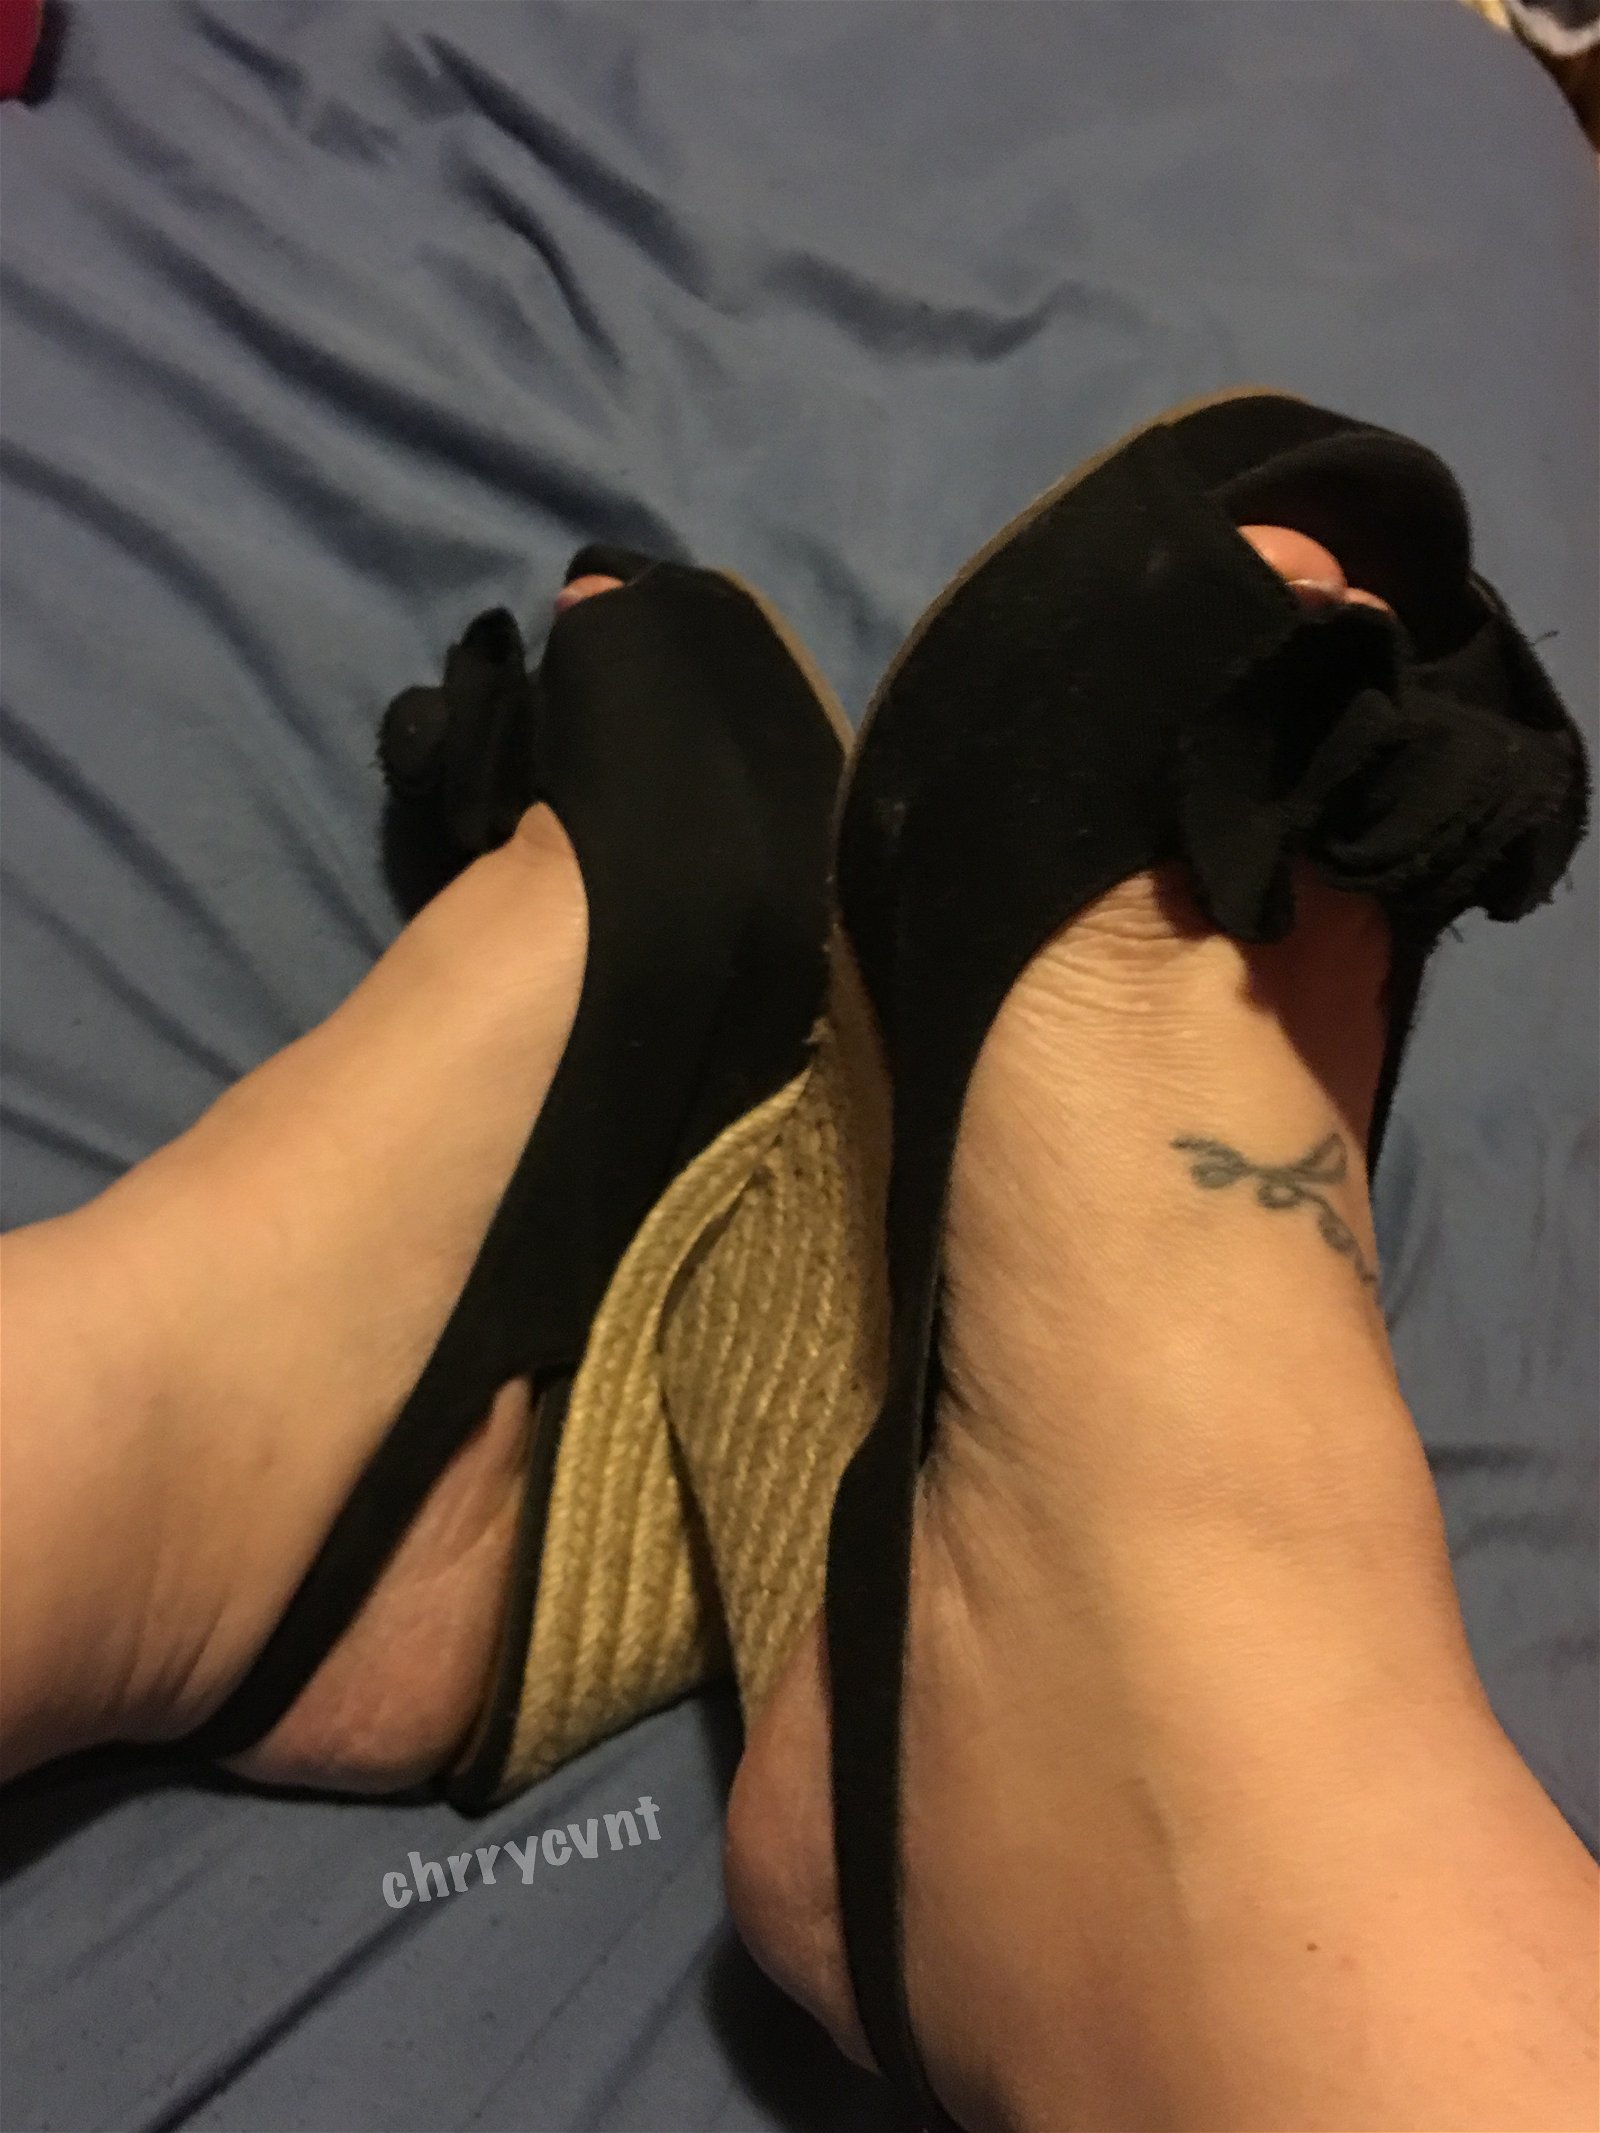 Photo by demi / chrrycvnt with the username @chrrycvnt, who is a verified user,  December 17, 2018 at 3:21 AM. The post is about the topic Foot Fetish and the text says 'FEET PICS! 

     🍒$5/3
     🍒$10/5

cashapp/circlepay only • kik me @ chrrycvnt to purchase'